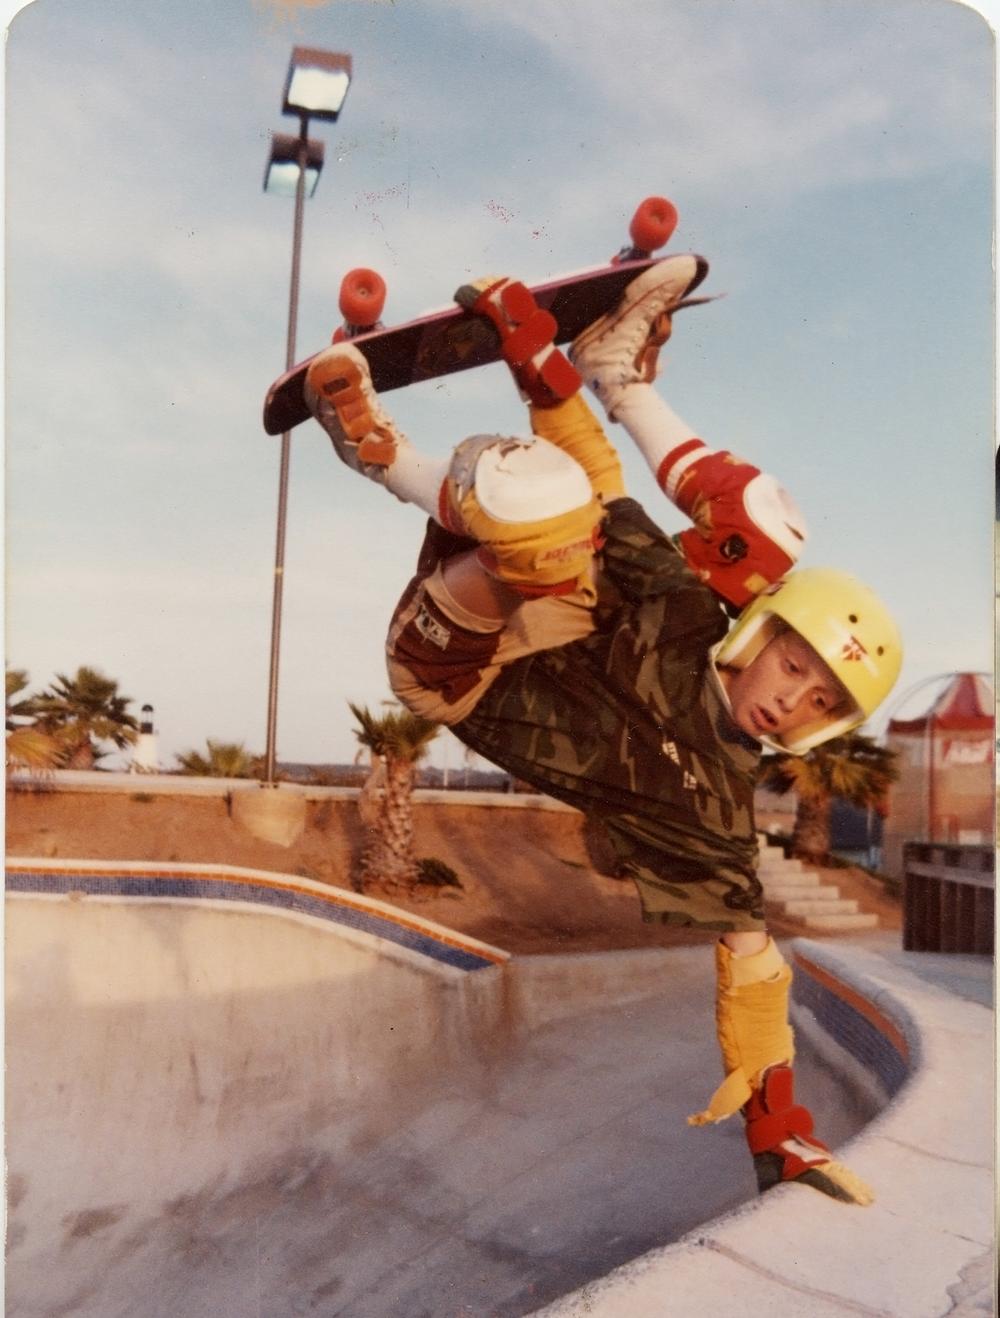 As a child, skateboarding gave Hawk an outlet for his excessive energy and helped him to feel accepted